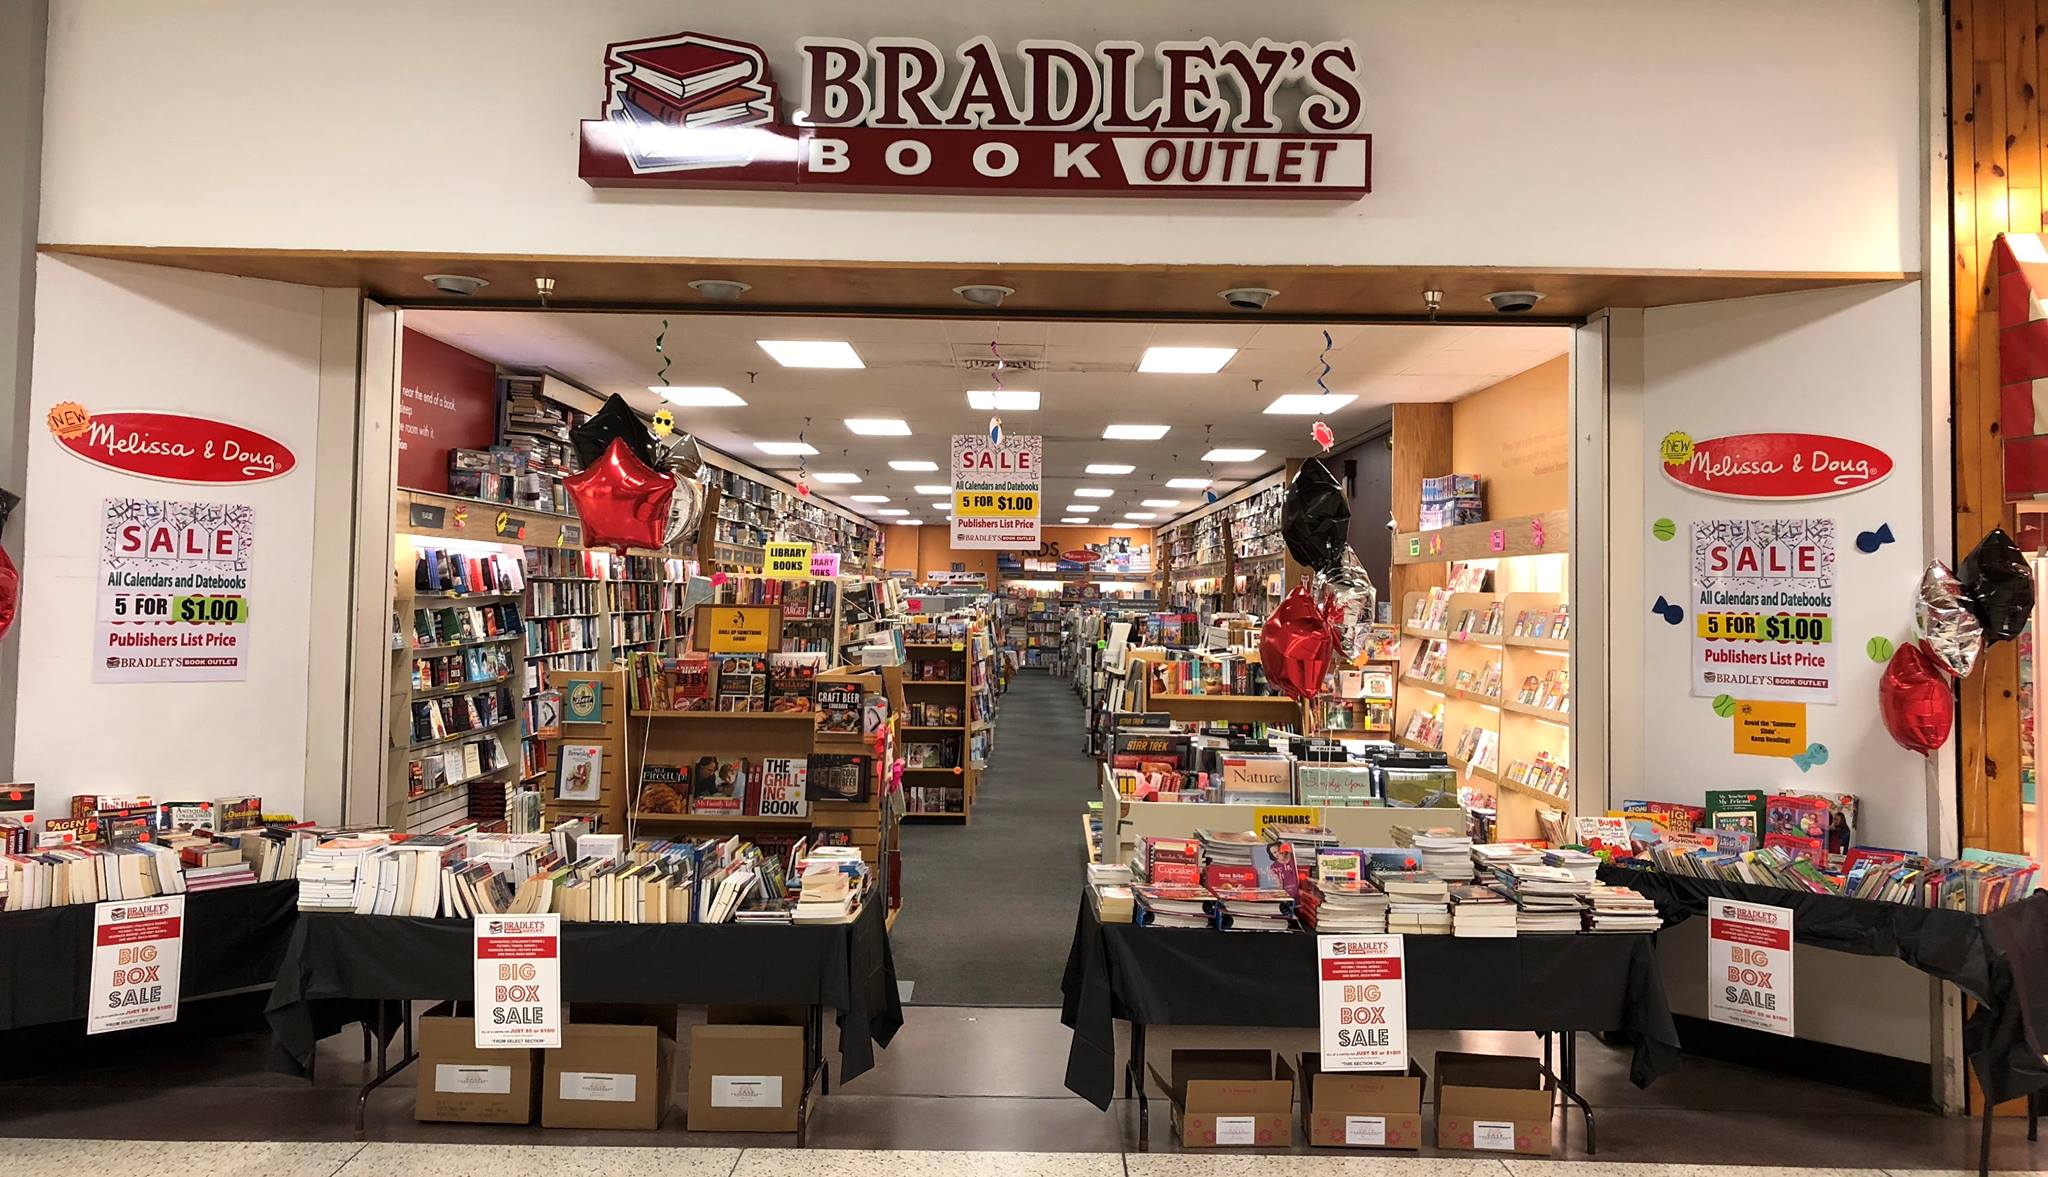 Bradley's Book Outlet closing its brick-and-mortar stores